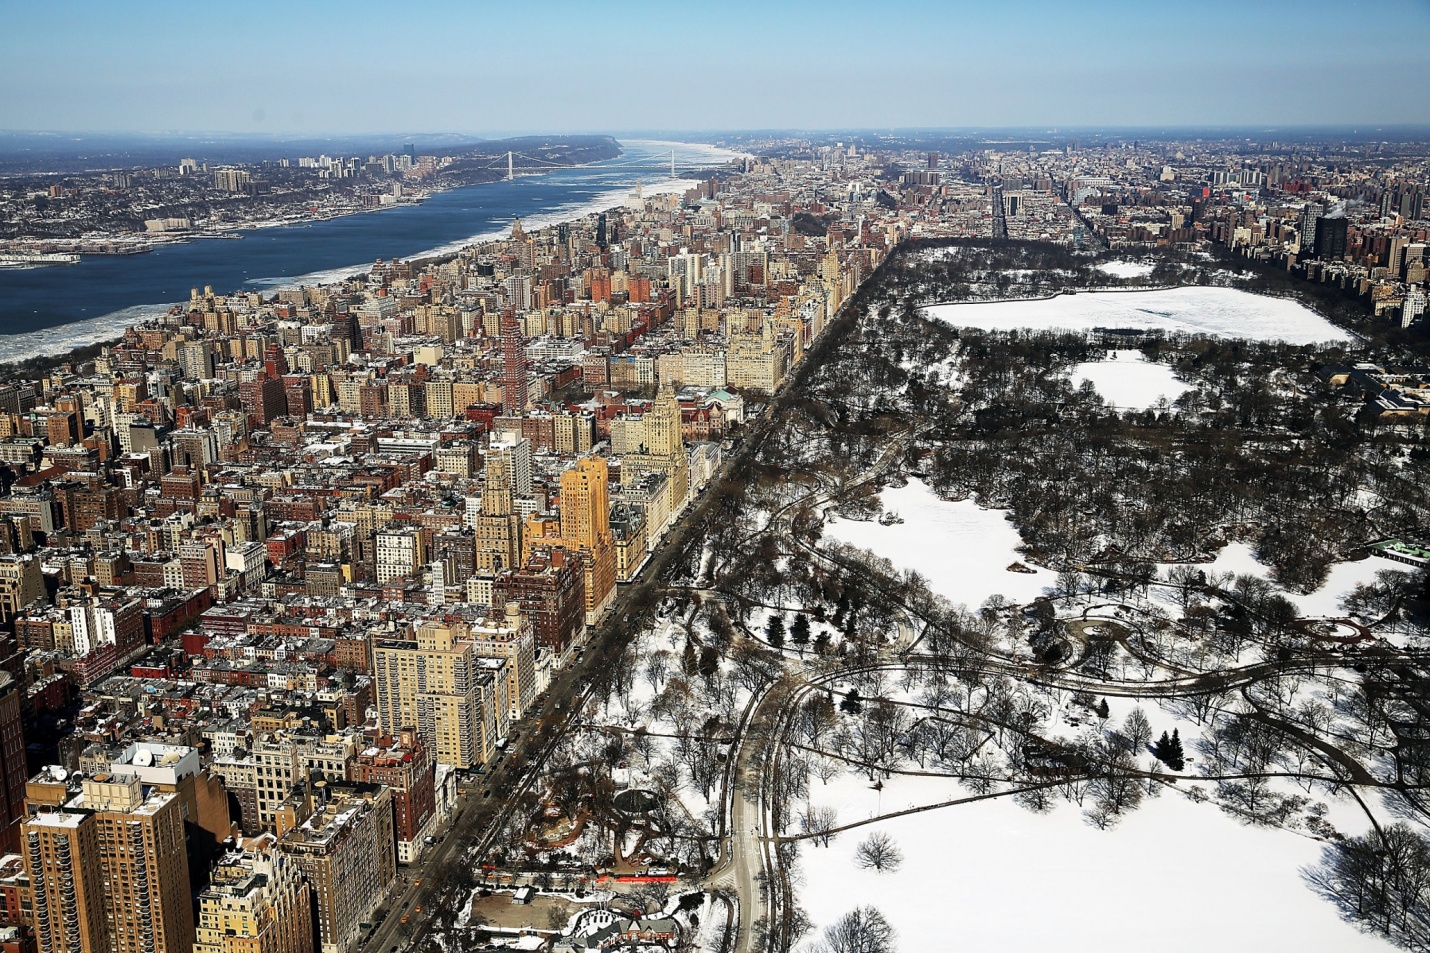 The Frozen Apple, an Aerial Photo of Central Park and Lower